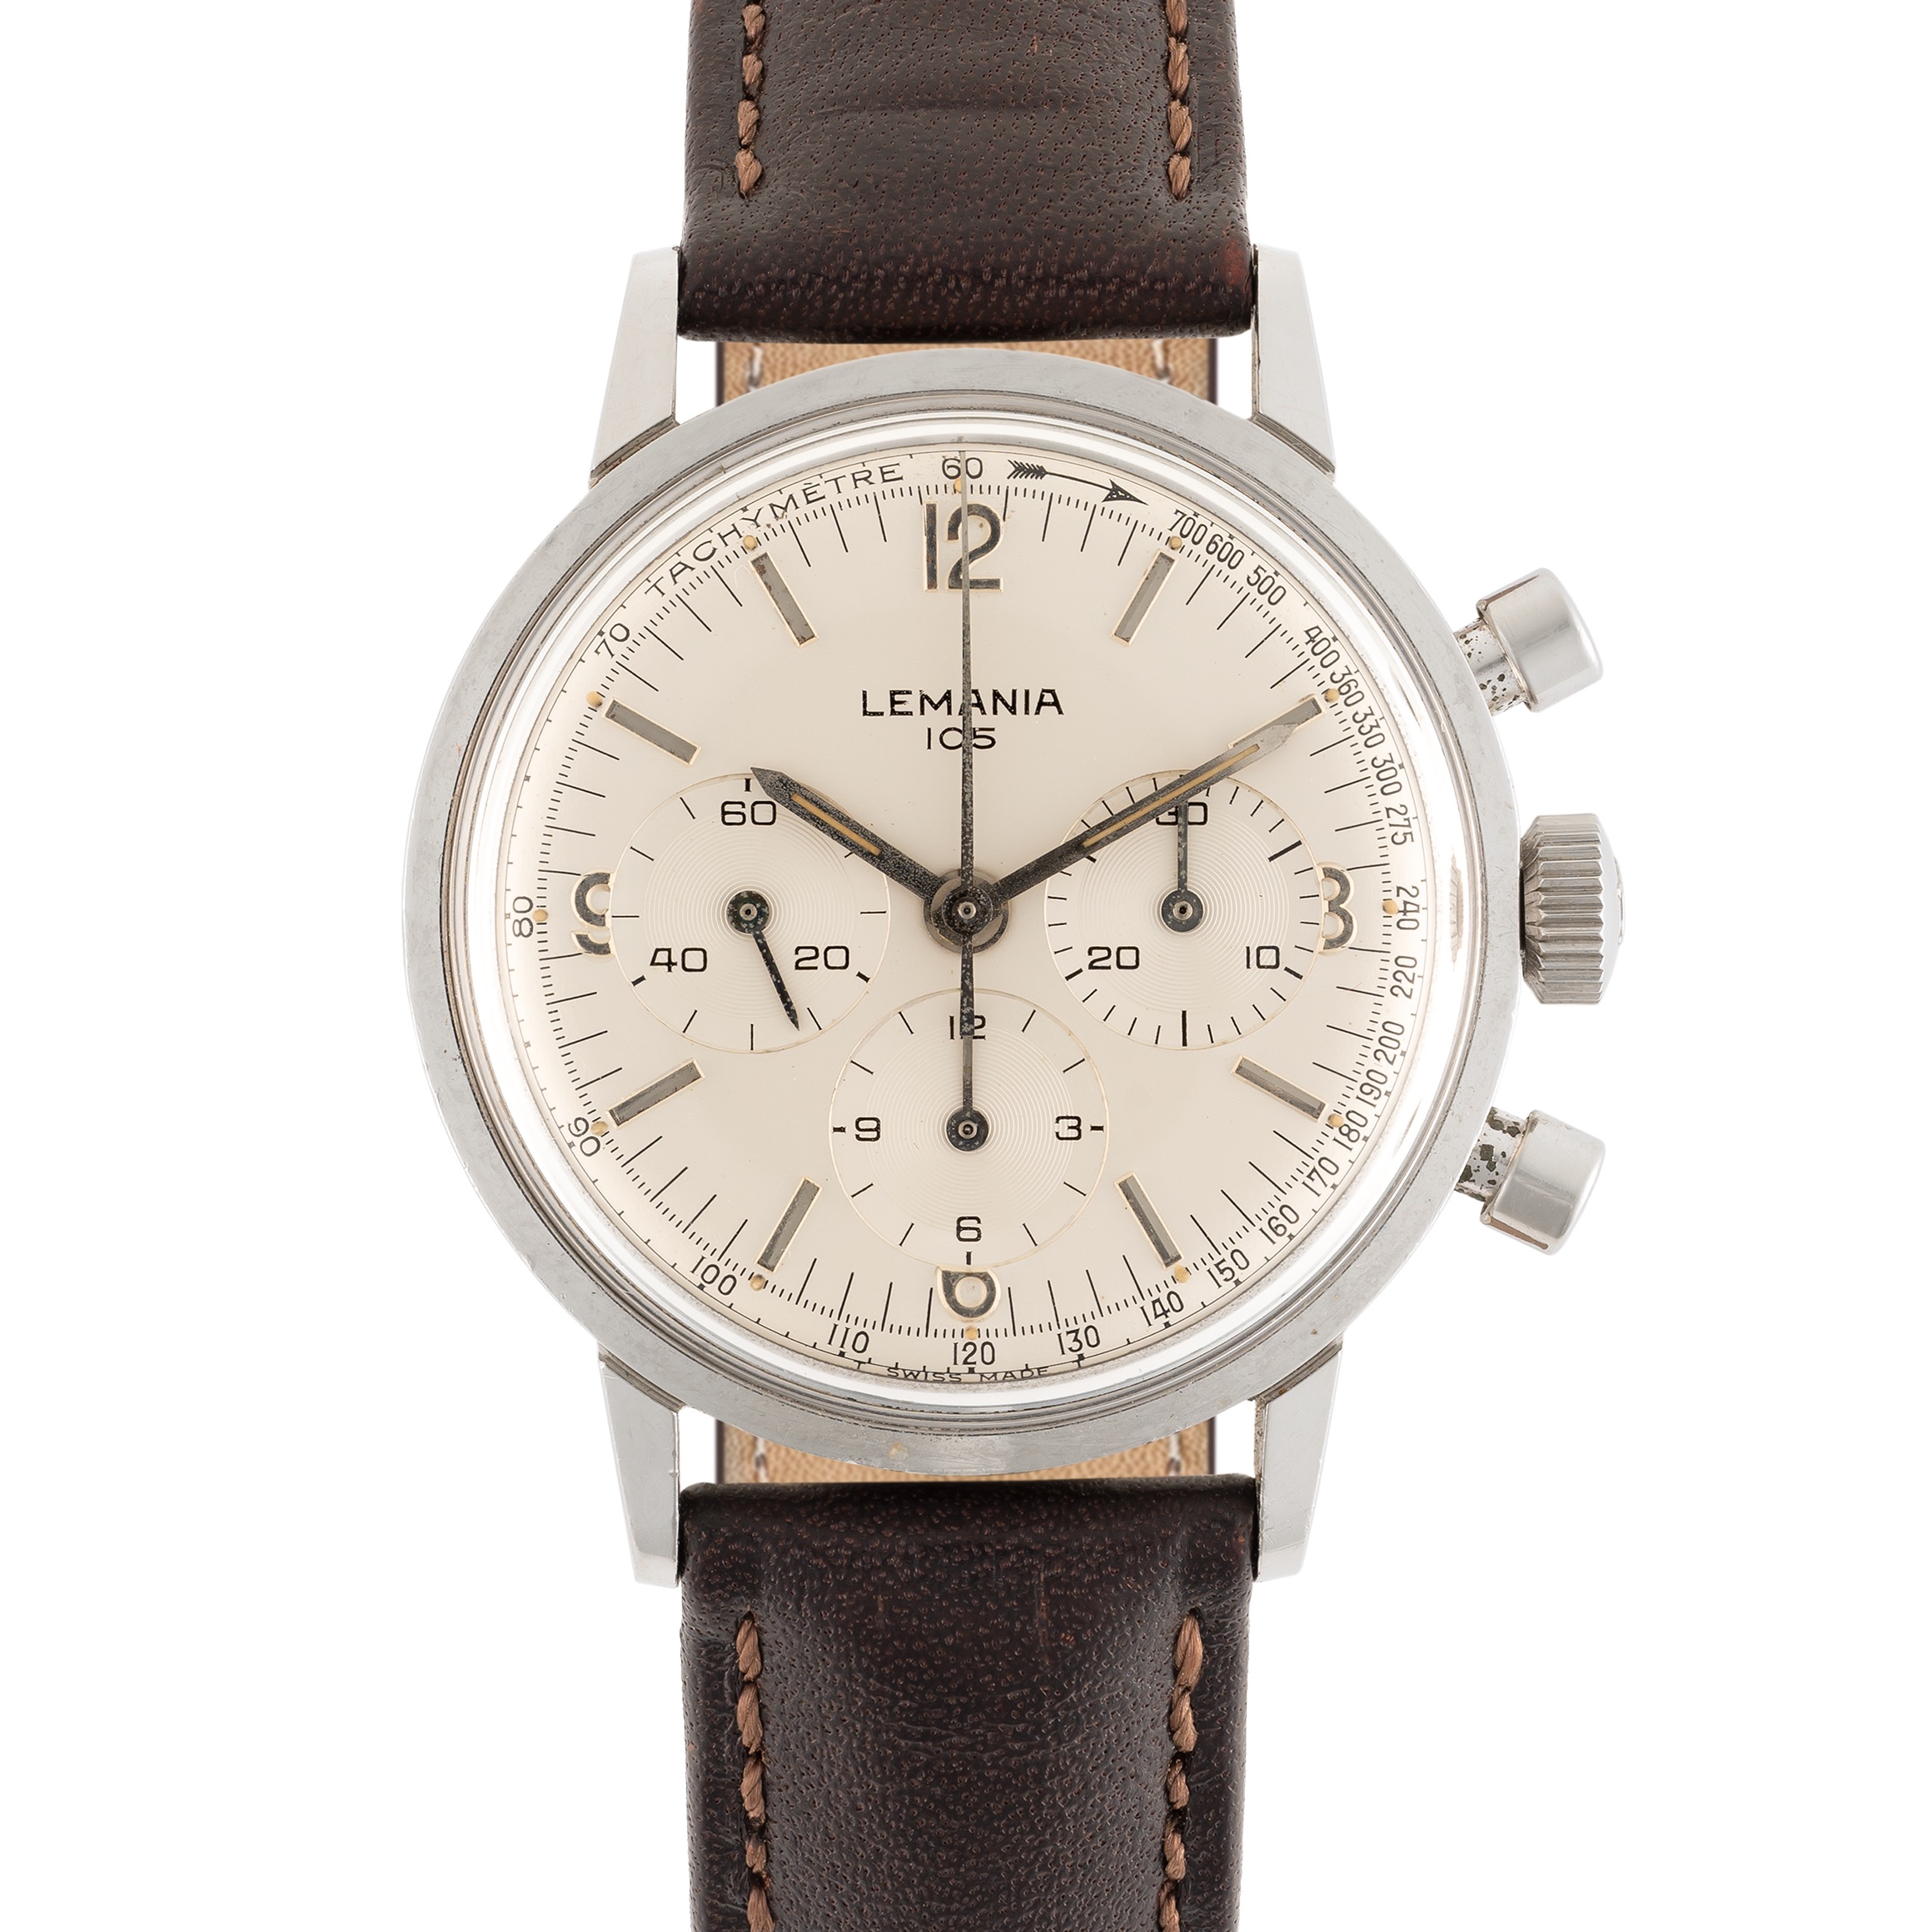 A RARE GENTLEMAN'S STAINLESS STEEL LEMANIA WATERPROOF CHRONOGRAPH WRIST WATCH CIRCA 1960s, ISSUED TO - Image 2 of 10